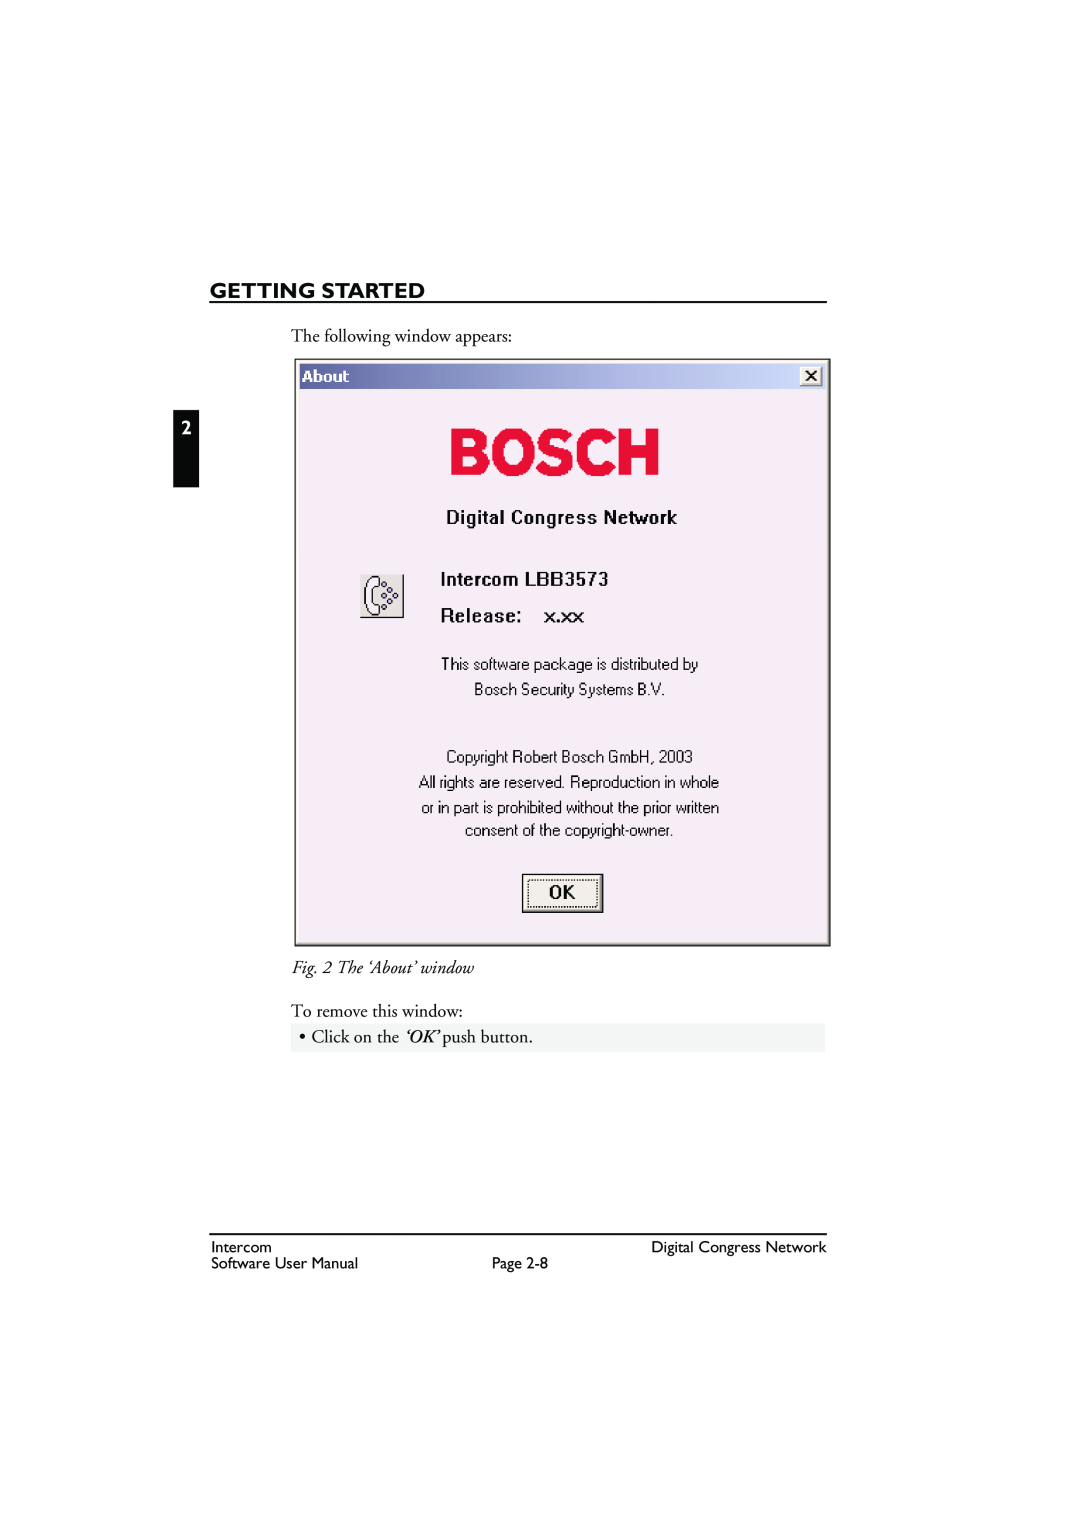 Bosch Appliances LBB 3573 The ‘About’ window, Getting Started, The following window appears, To remove this window 